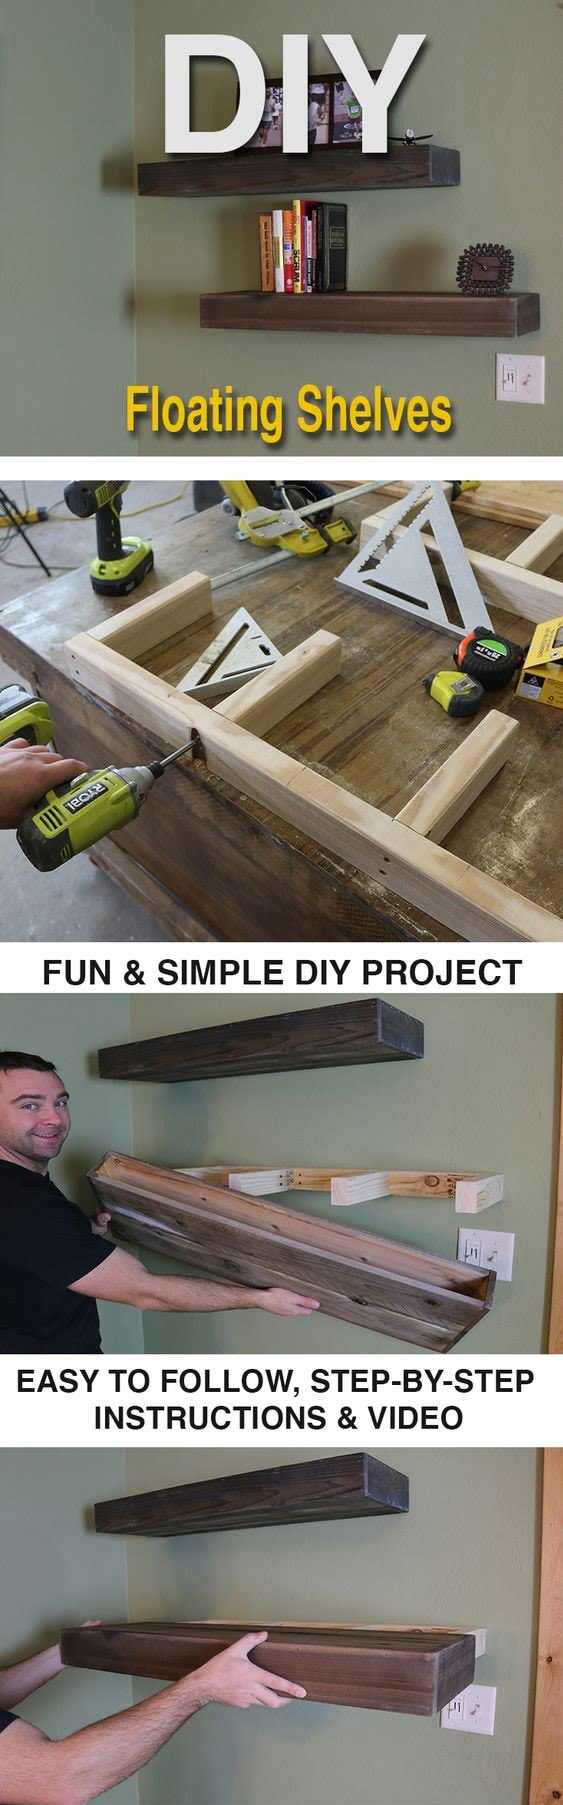 LEARN HOW TO MAKE A WOOD FLOATING SHELVES